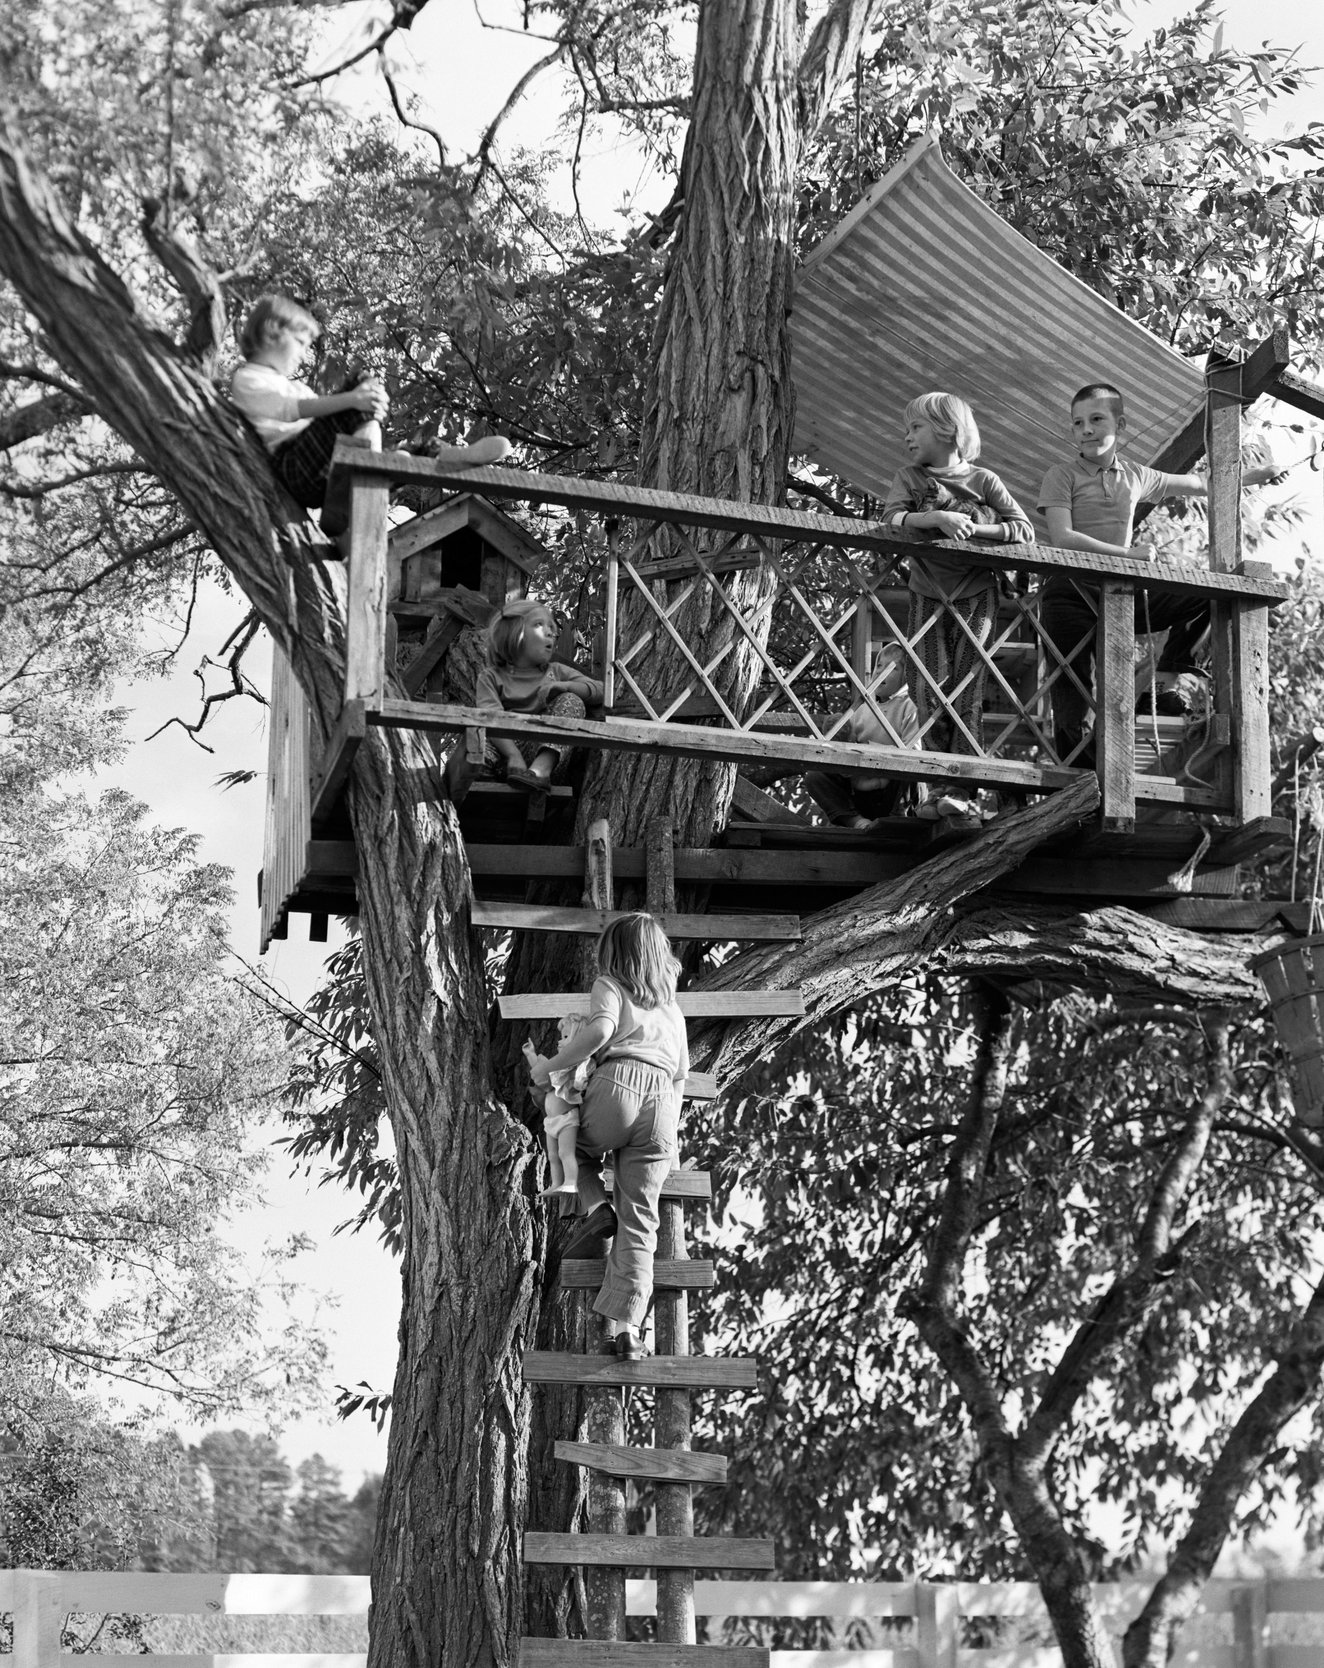 BR9JJ7 1960s KIDS PLAYING IN TREE HOUSE